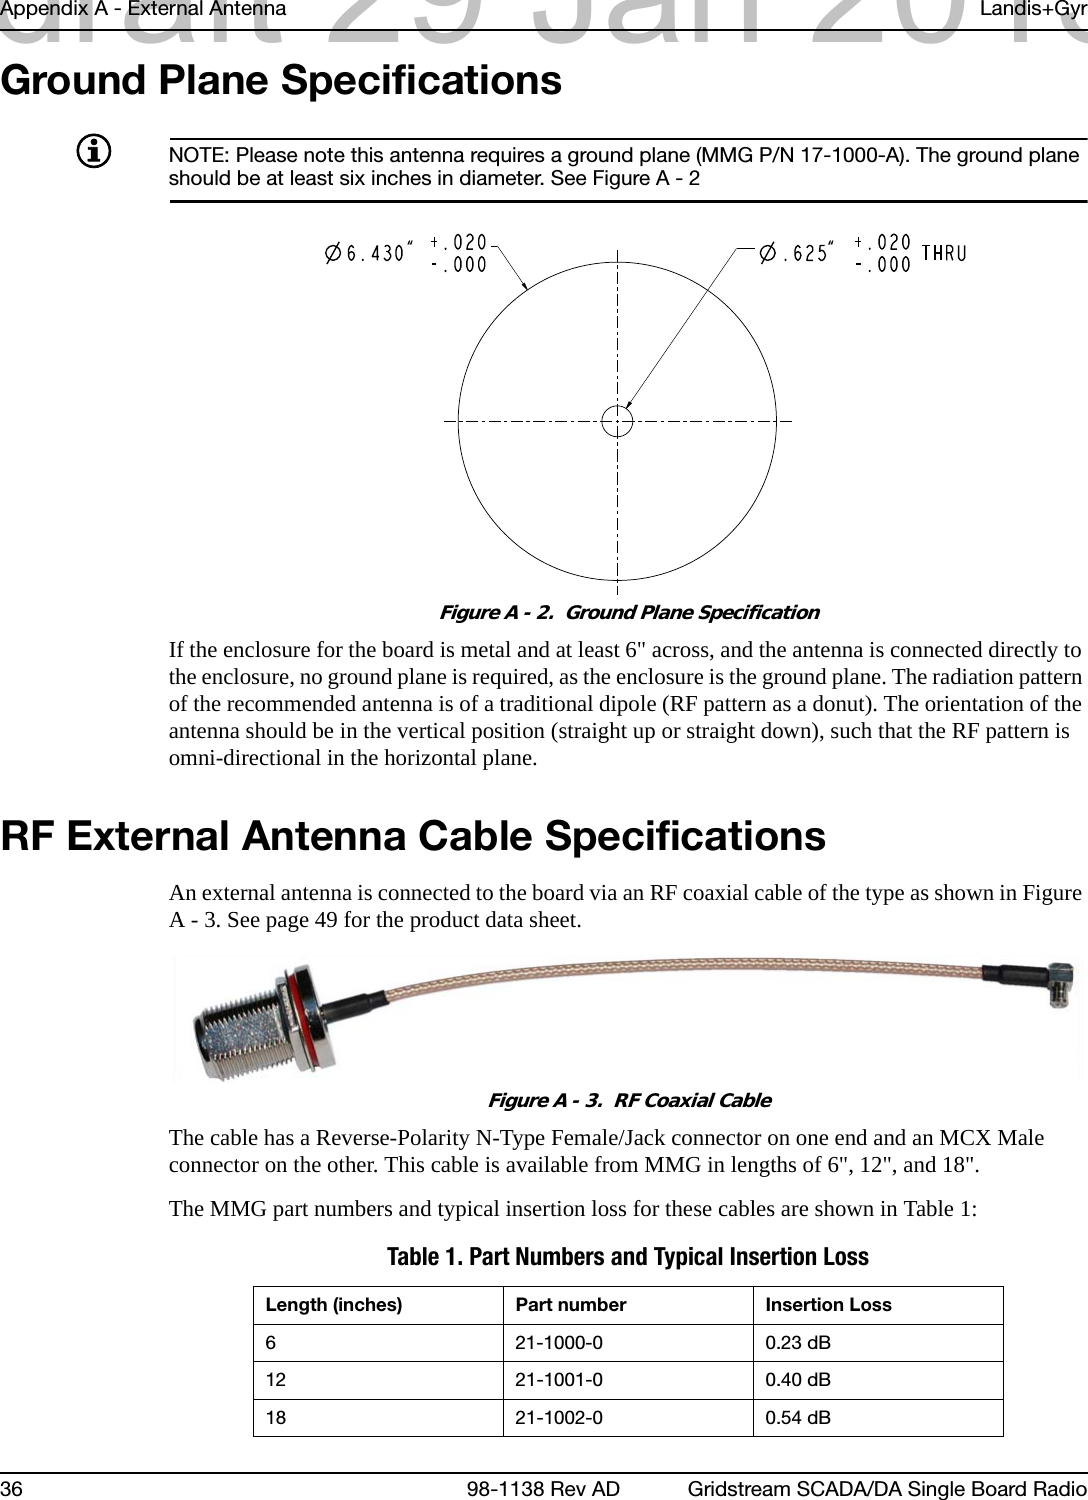 Appendix A - External Antenna Landis+Gyr36 98-1138 Rev AD Gridstream SCADA/DA Single Board RadioGround Plane SpecificationsNOTE: Please note this antenna requires a ground plane (MMG P/N 17-1000-A). The ground plane should be at least six inches in diameter. See Figure A - 2Figure A - 2.  Ground Plane SpecificationIf the enclosure for the board is metal and at least 6&quot; across, and the antenna is connected directly to the enclosure, no ground plane is required, as the enclosure is the ground plane. The radiation pattern of the recommended antenna is of a traditional dipole (RF pattern as a donut). The orientation of the antenna should be in the vertical position (straight up or straight down), such that the RF pattern is omni-directional in the horizontal plane.RF External Antenna Cable SpecificationsAn external antenna is connected to the board via an RF coaxial cable of the type as shown in Figure A - 3. See page 49 for the product data sheet.Figure A - 3.  RF Coaxial CableThe cable has a Reverse-Polarity N-Type Female/Jack connector on one end and an MCX Male connector on the other. This cable is available from MMG in lengths of 6&quot;, 12&quot;, and 18&quot;.The MMG part numbers and typical insertion loss for these cables are shown in Table 1:““Table 1. Part Numbers and Typical Insertion LossLength (inches) Part number Insertion Loss6 21-1000-0 0.23 dB12 21-1001-0 0.40 dB18 21-1002-0 0.54 dBdraft 29 Jan 2013